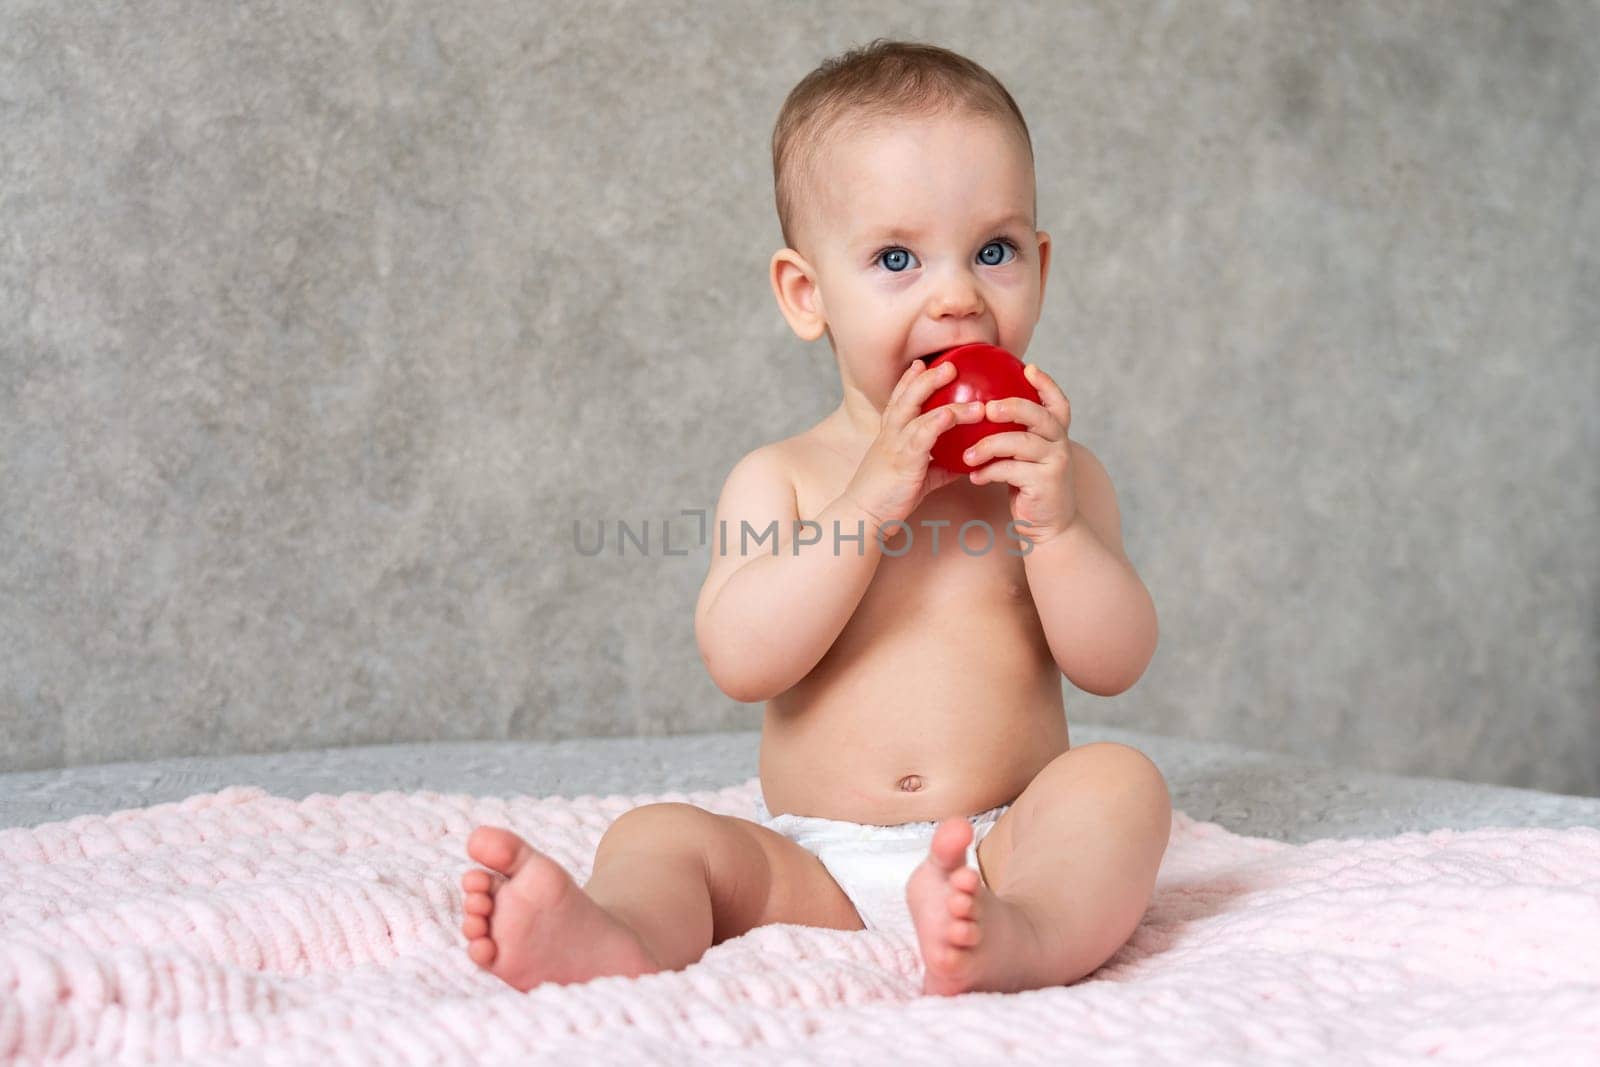 A kid with cheerful eyes is licking a small toy red ball with concentration by sdf_qwe